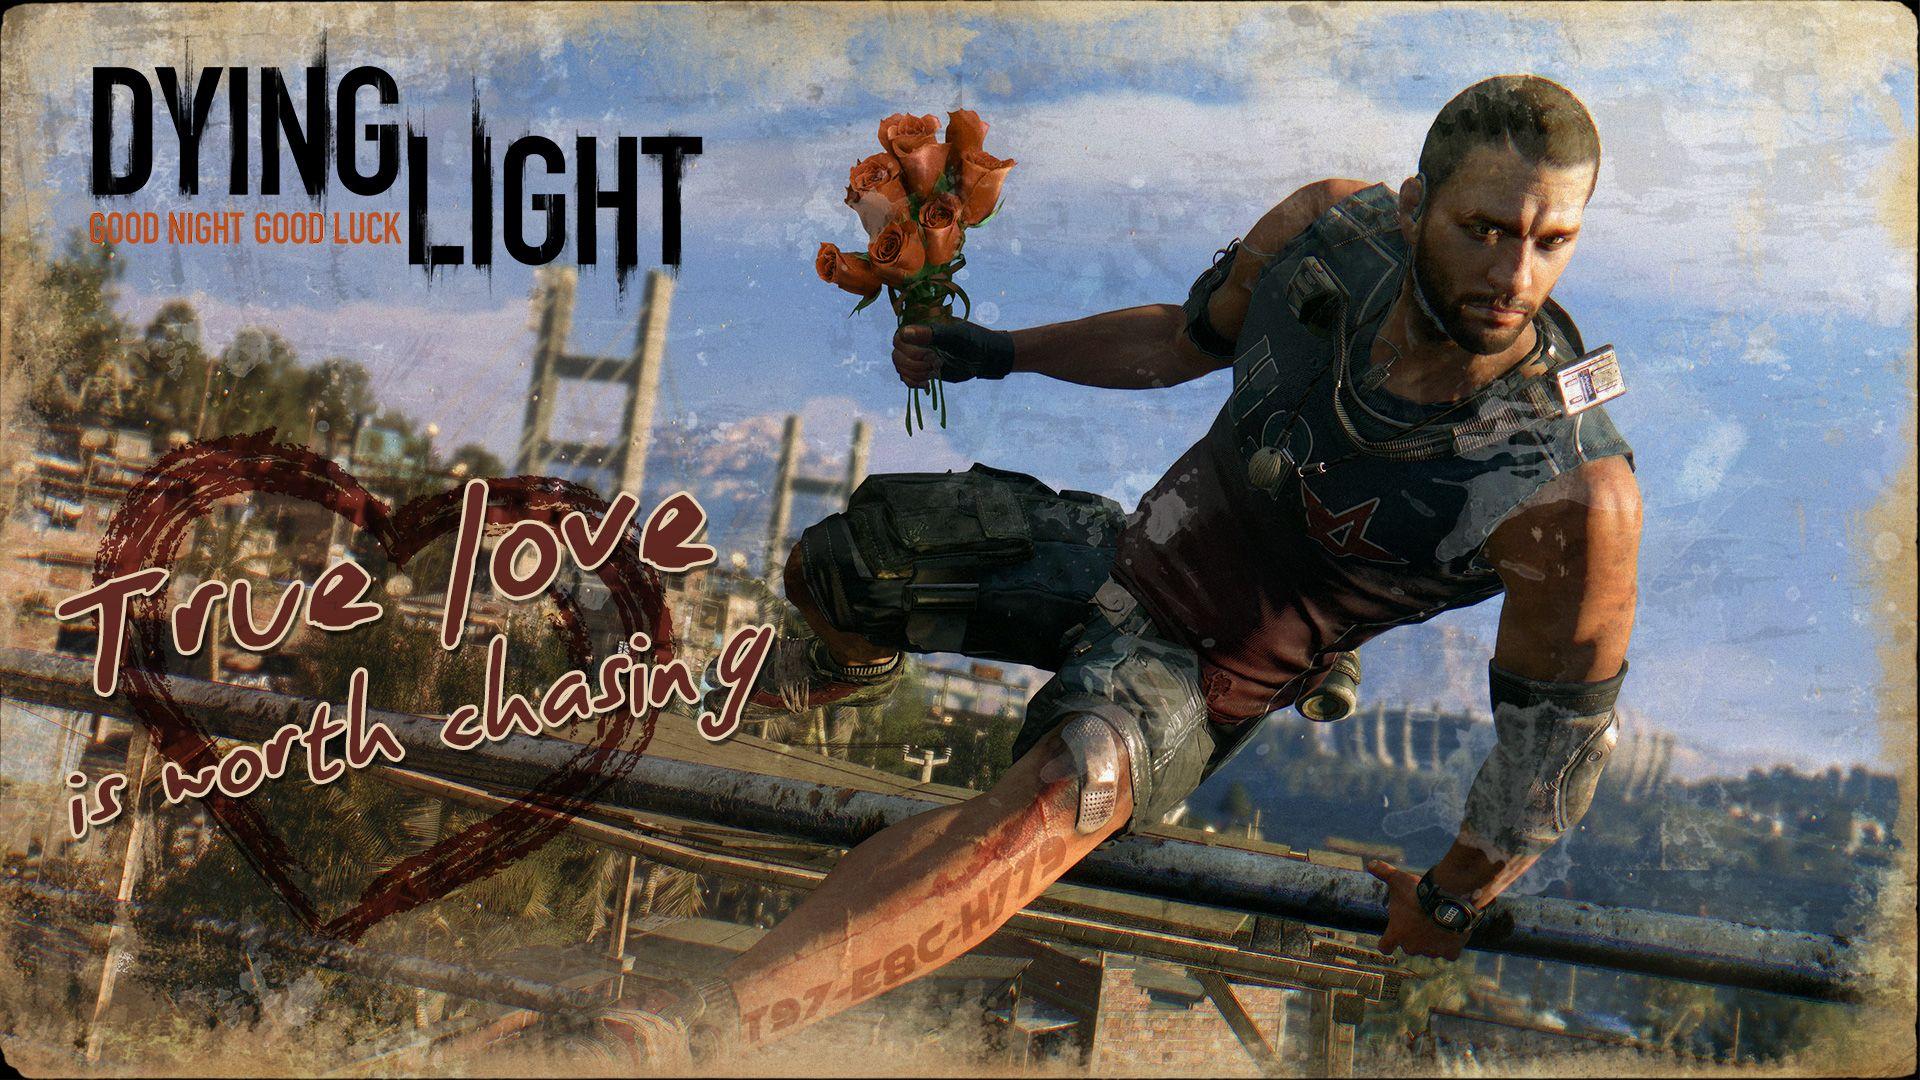 Dying Light Kyle Crane Wallpapers - Wallpaper Cave.